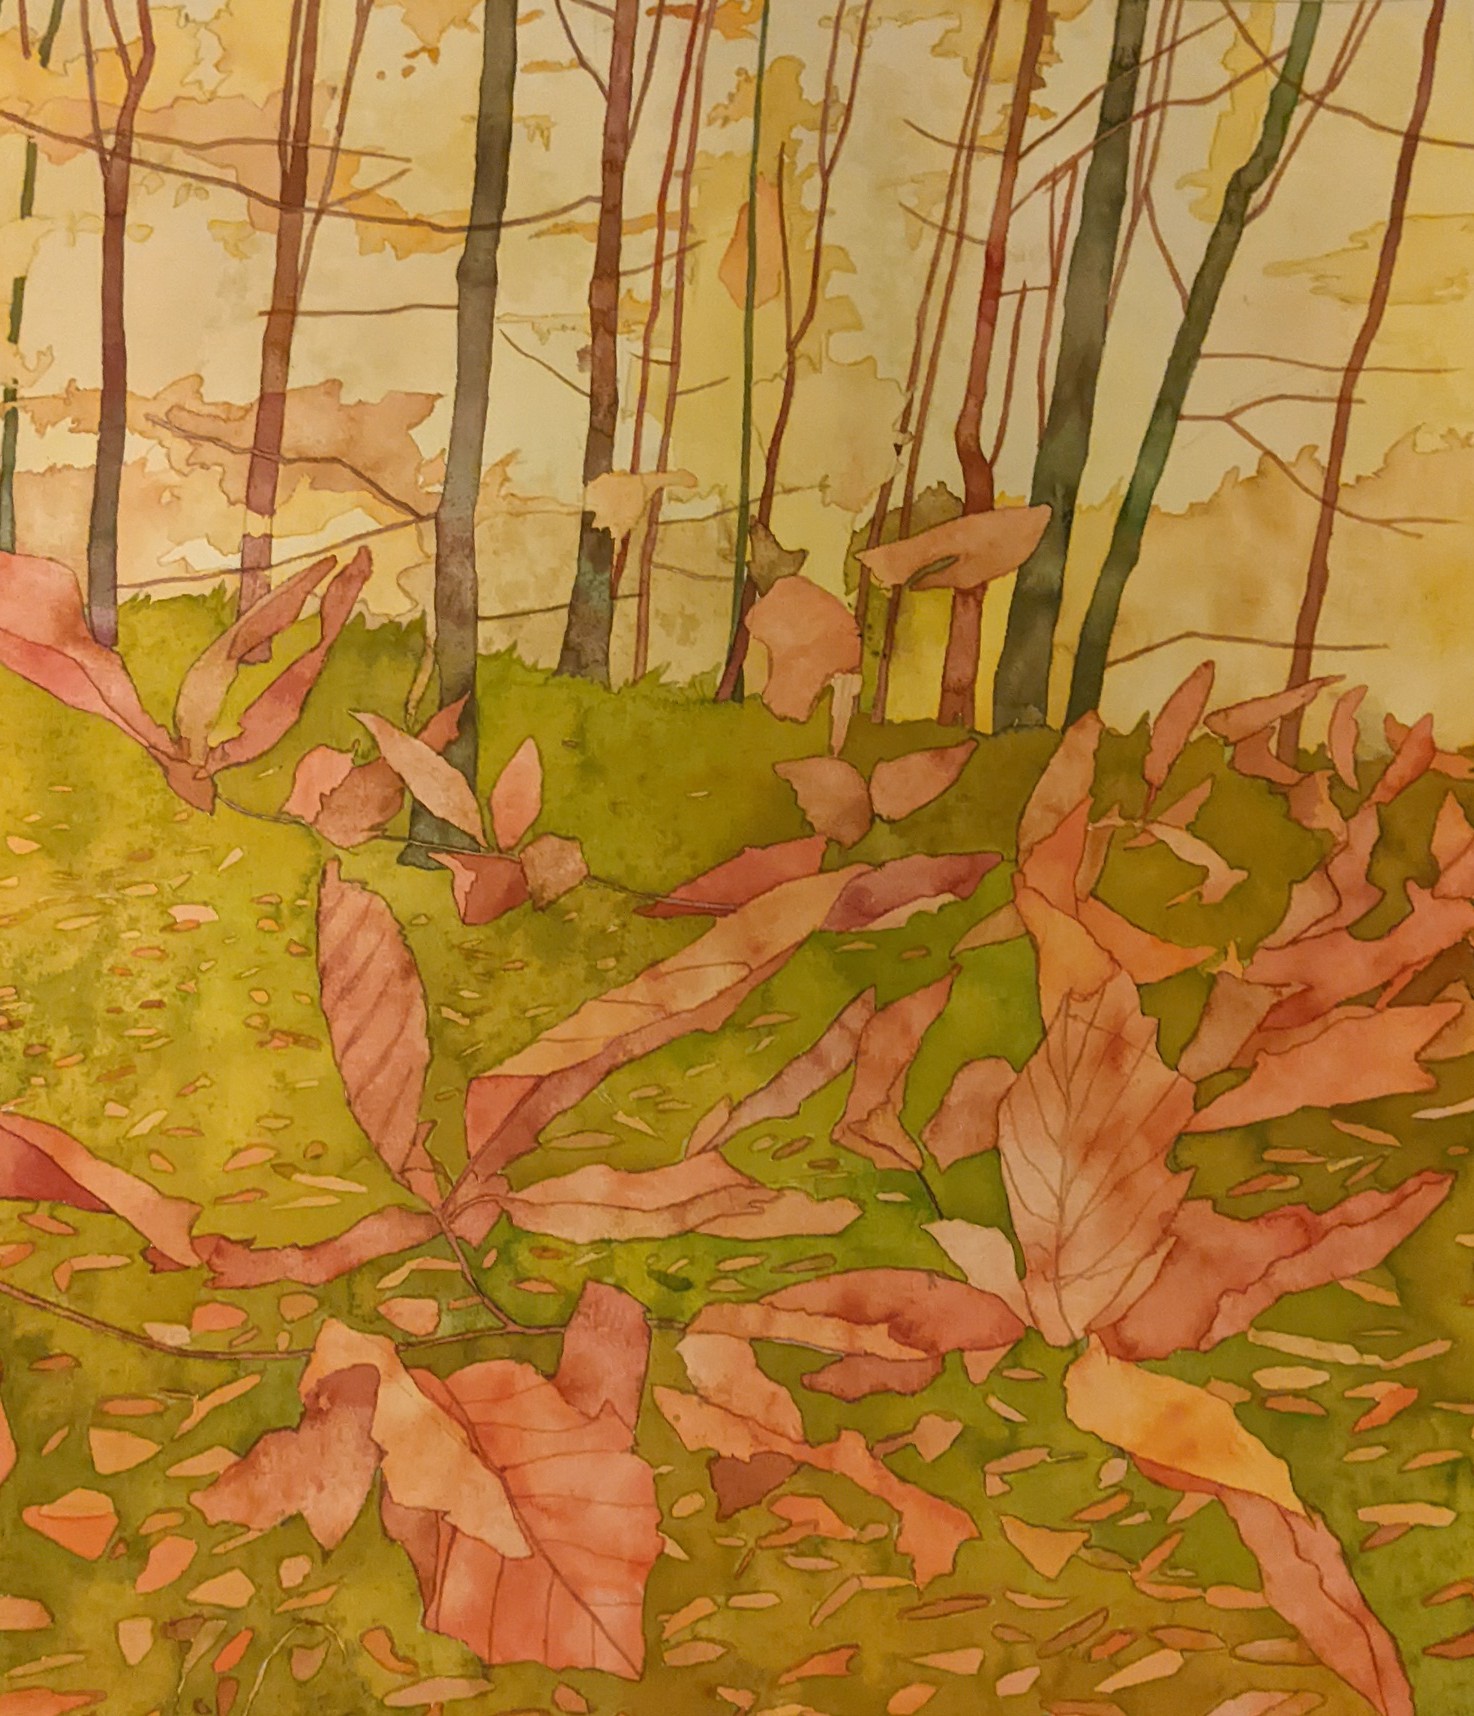 'Yellow Forest' by artist Katy Ellis